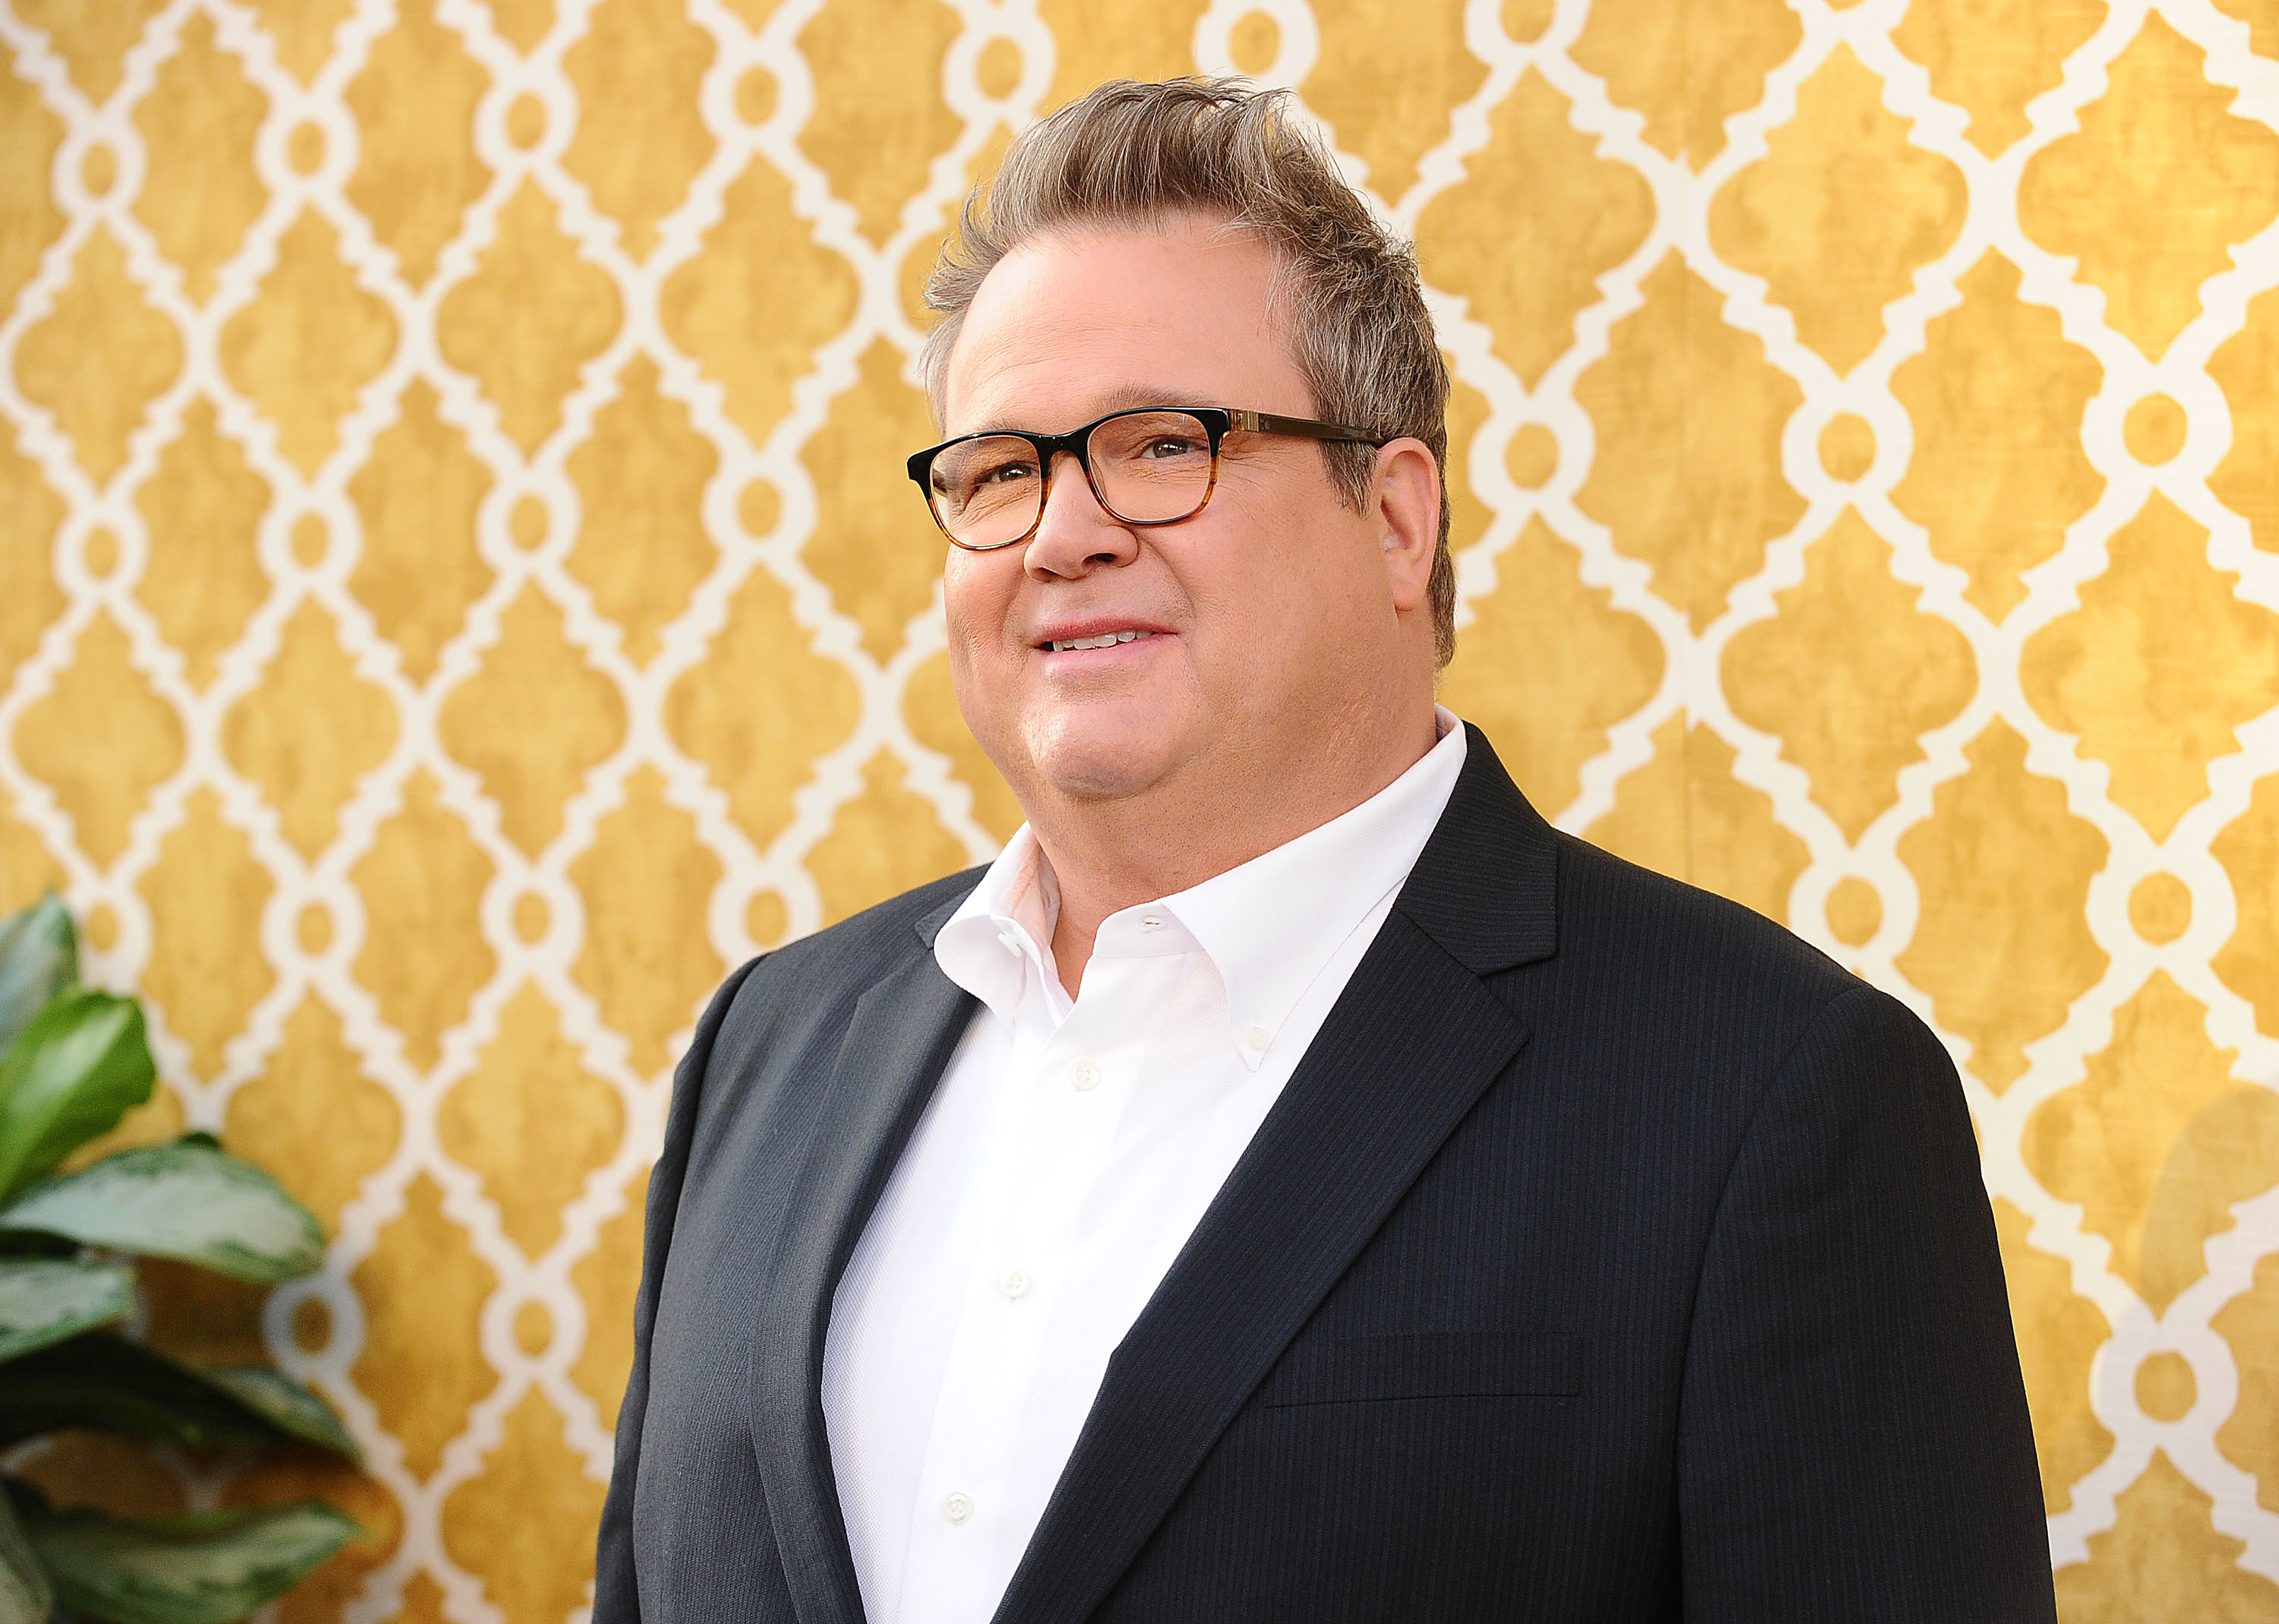 This is a photo of TV actor Eric Stonestreet.